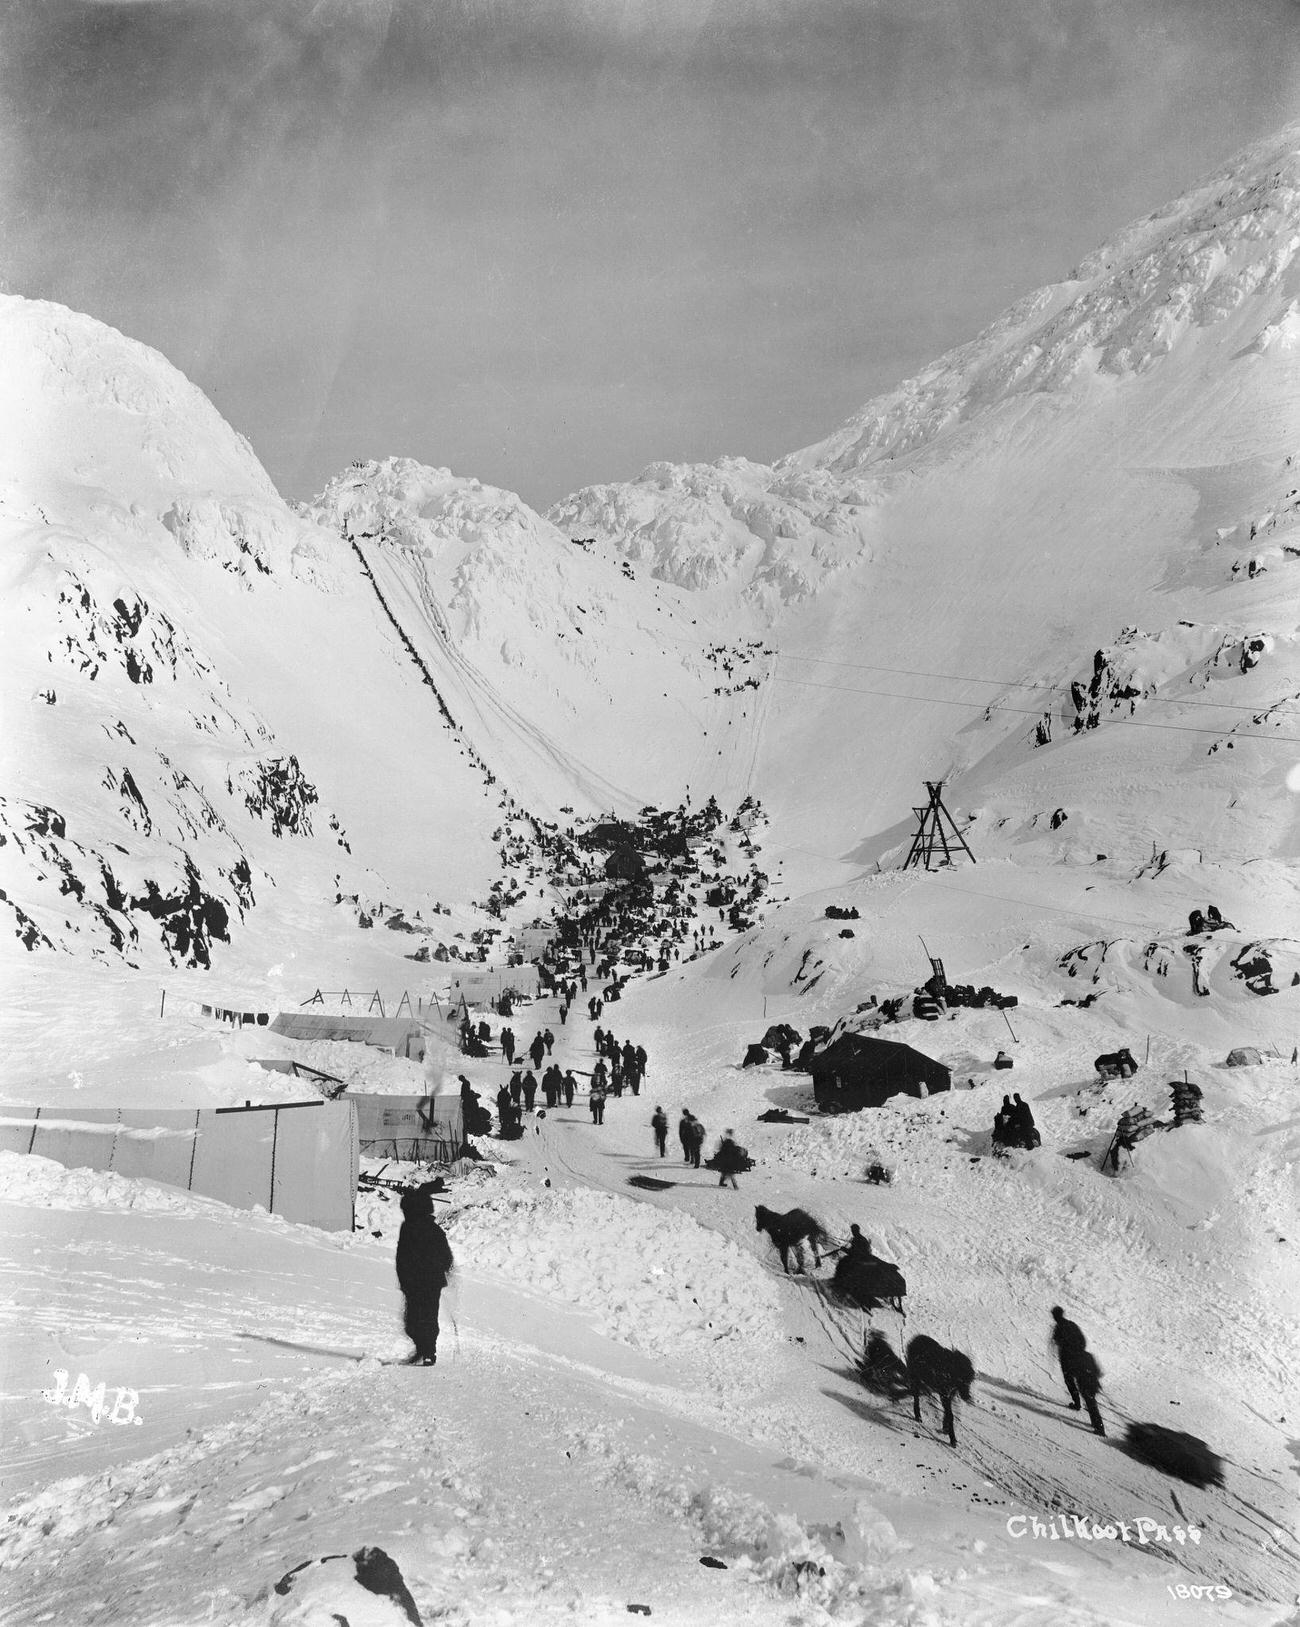 View of Chilkoot Pass, scales, and summit during the Klondike Gold Rush.